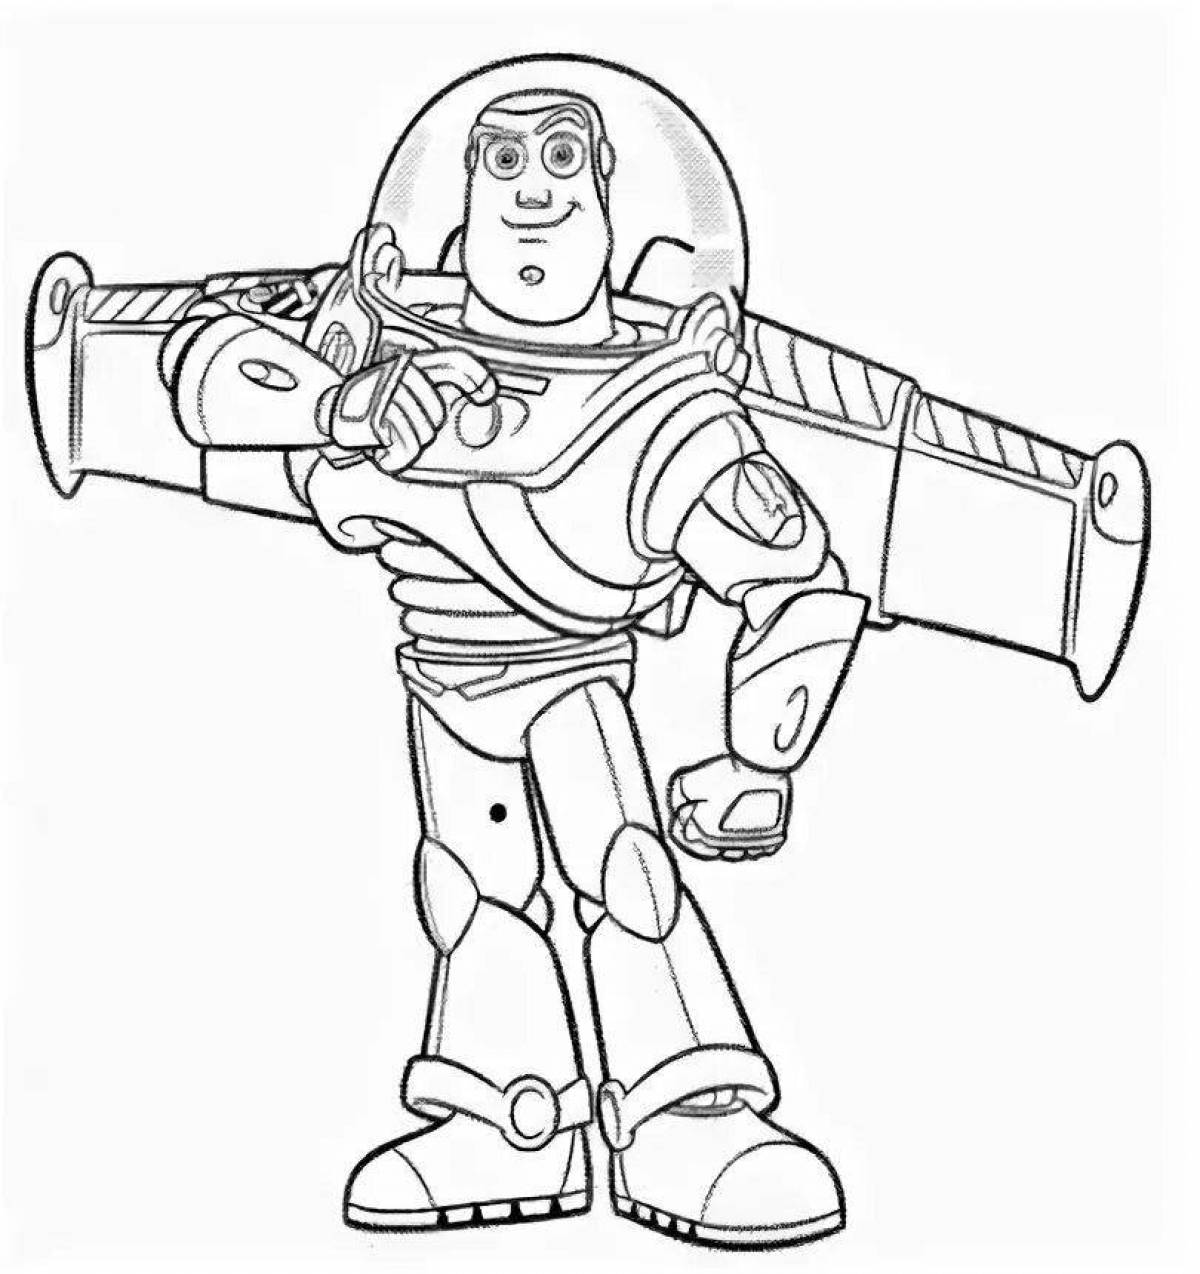 Charming coloring buzz lightyear